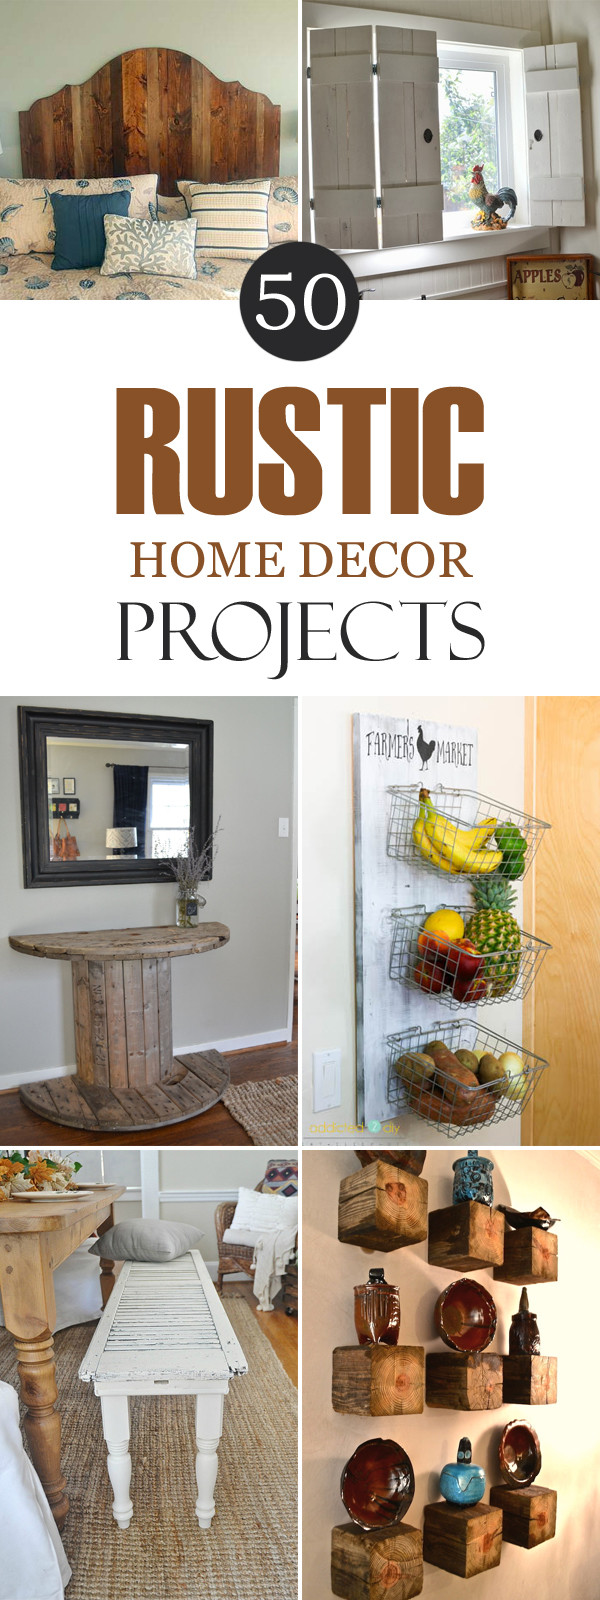 DIY Project Home Decor
 50 Rustic DIY Home Decor Projects